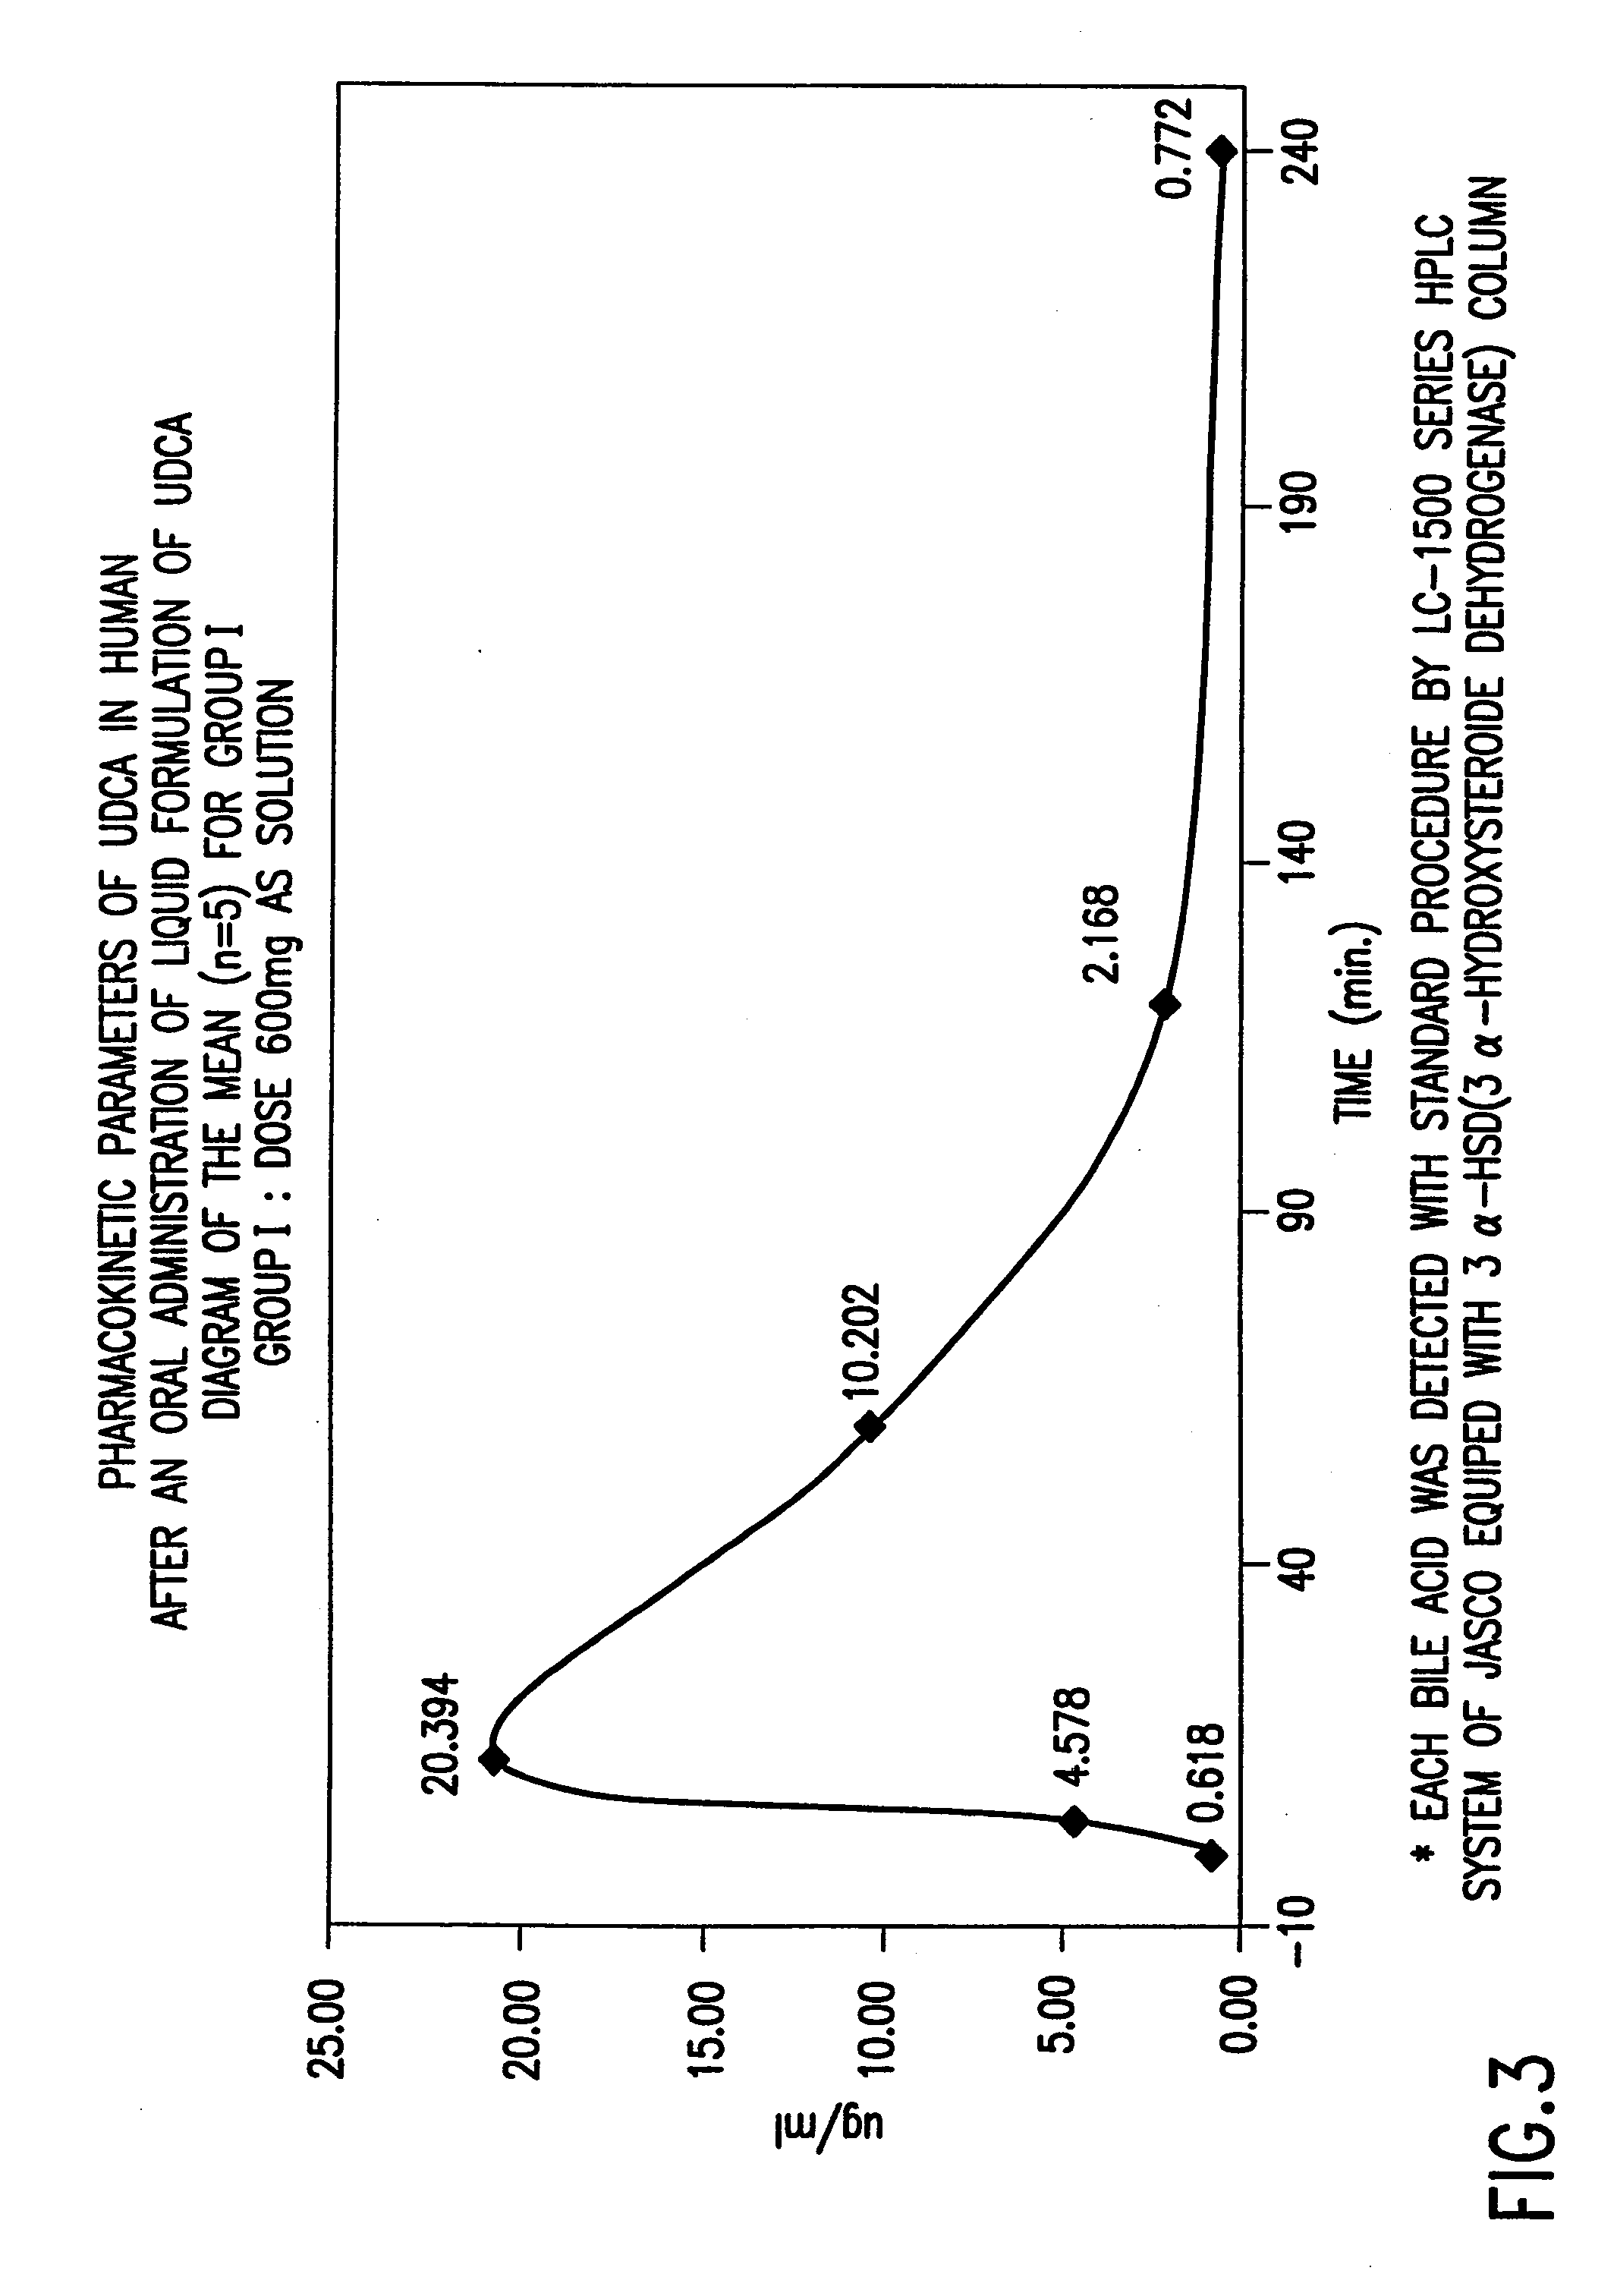 Preparation of Aqueous Clear Solution Dosage Forms with Bile Acids